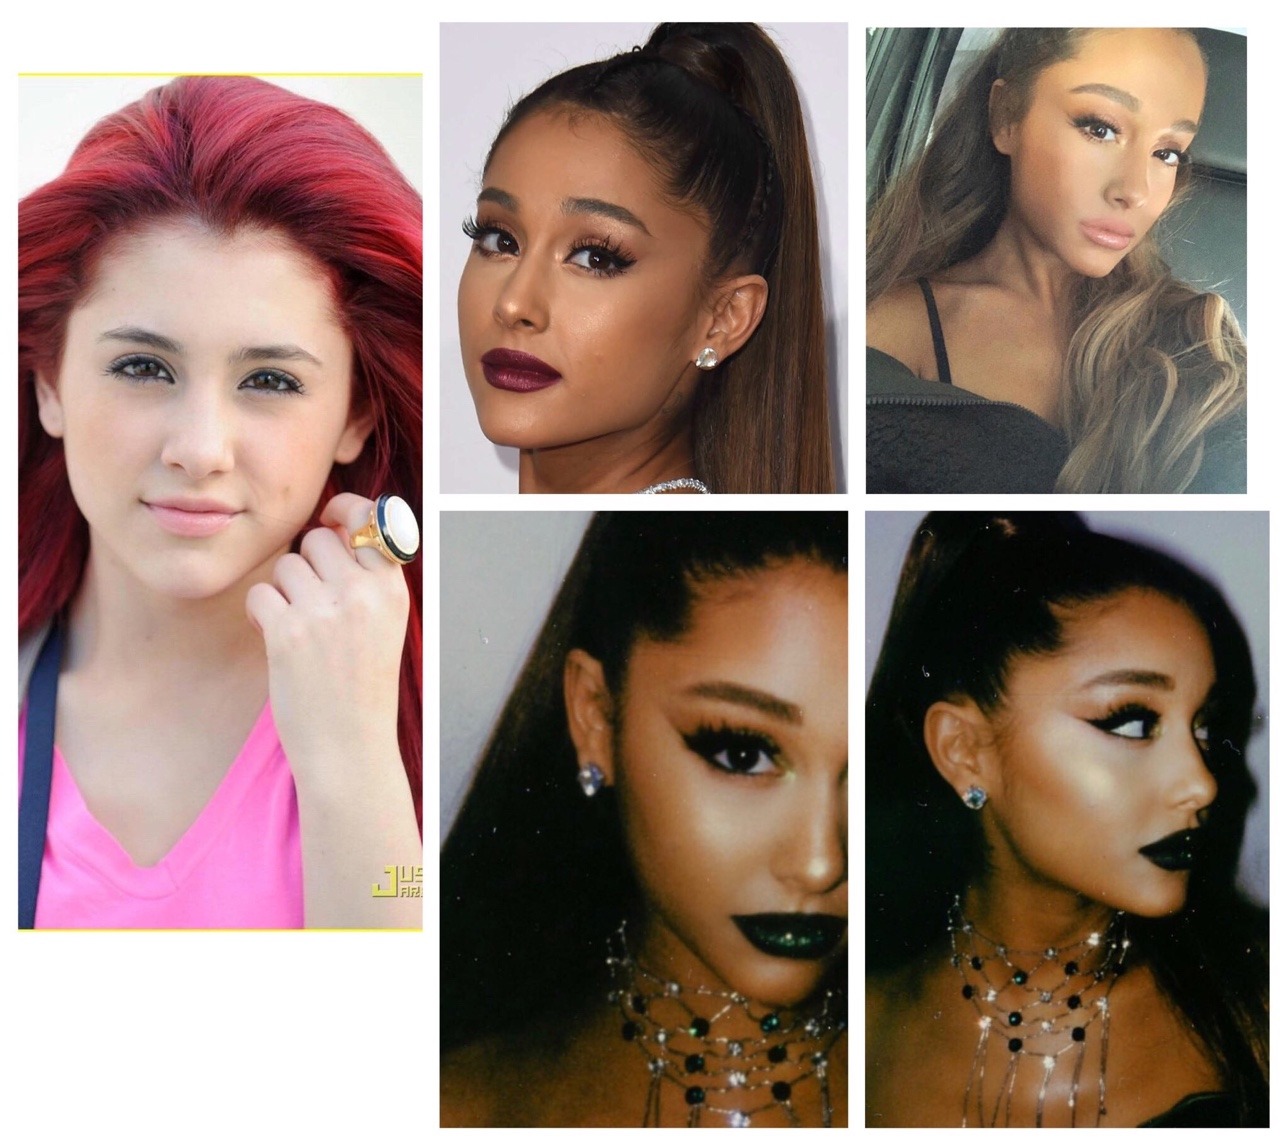 svckmyblog:  krxs100: Ariana Grande is darkening her skin and changing her features